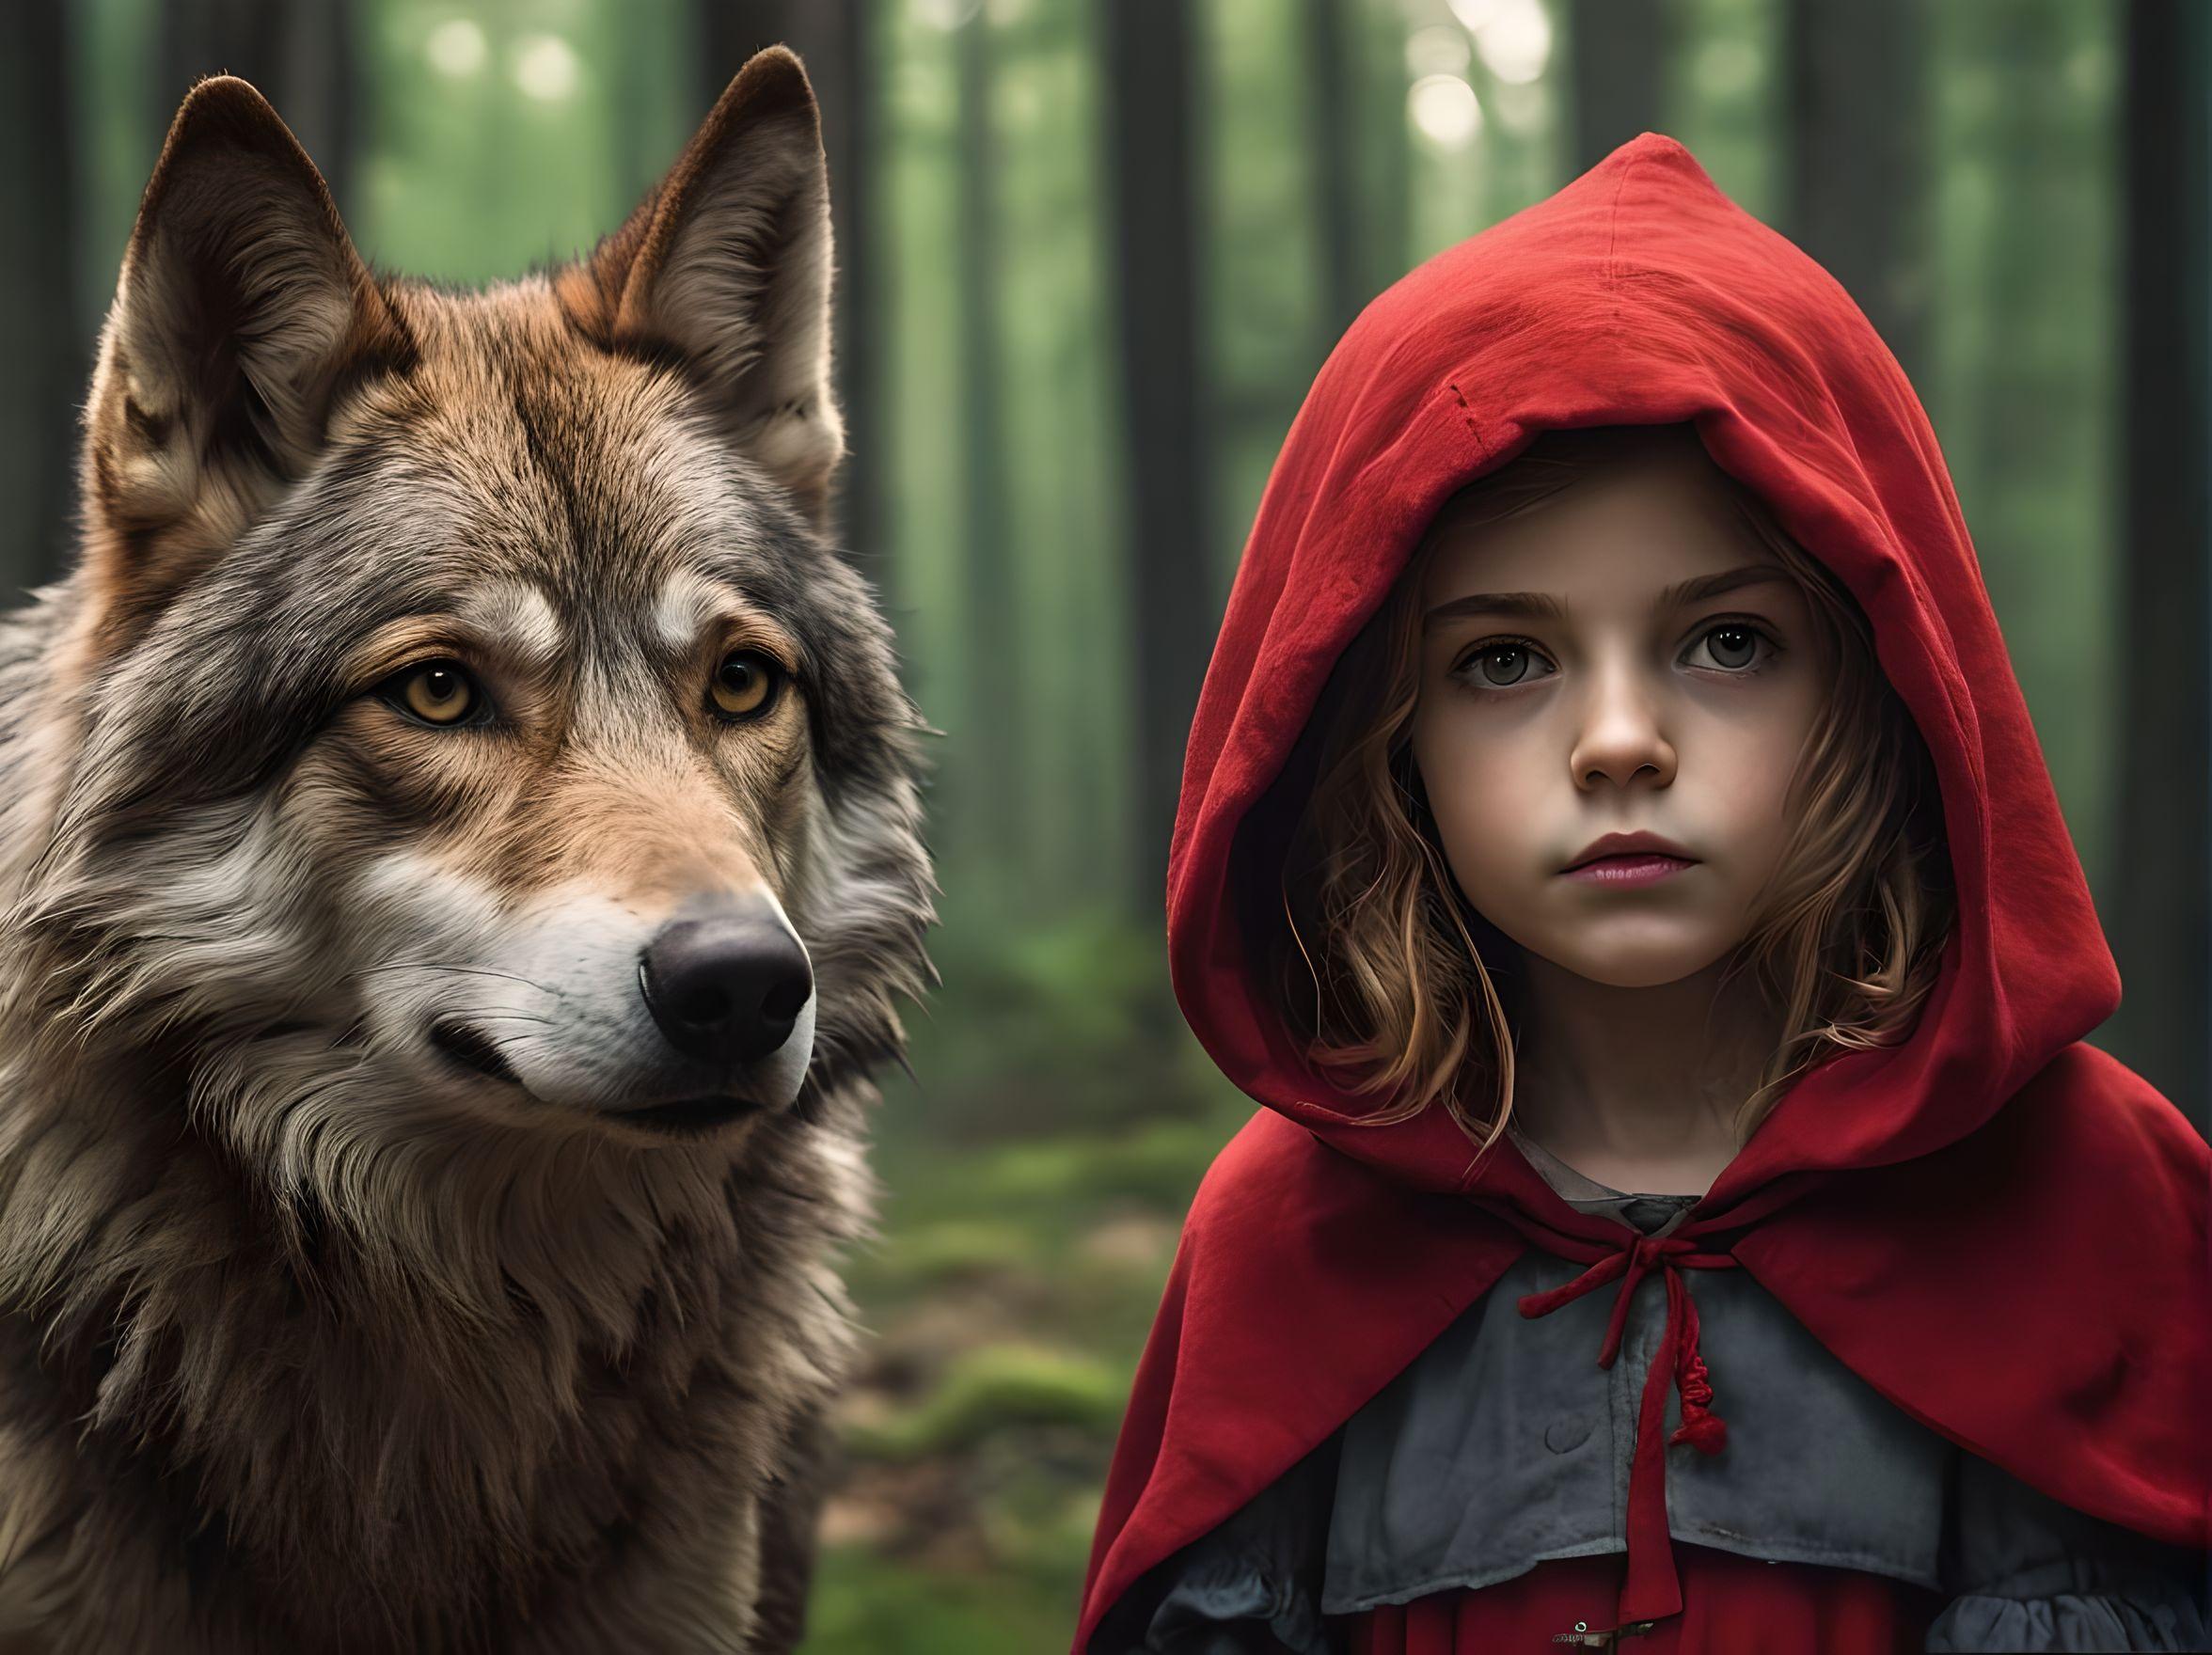 Little Red Riding Hood and one bad wolf